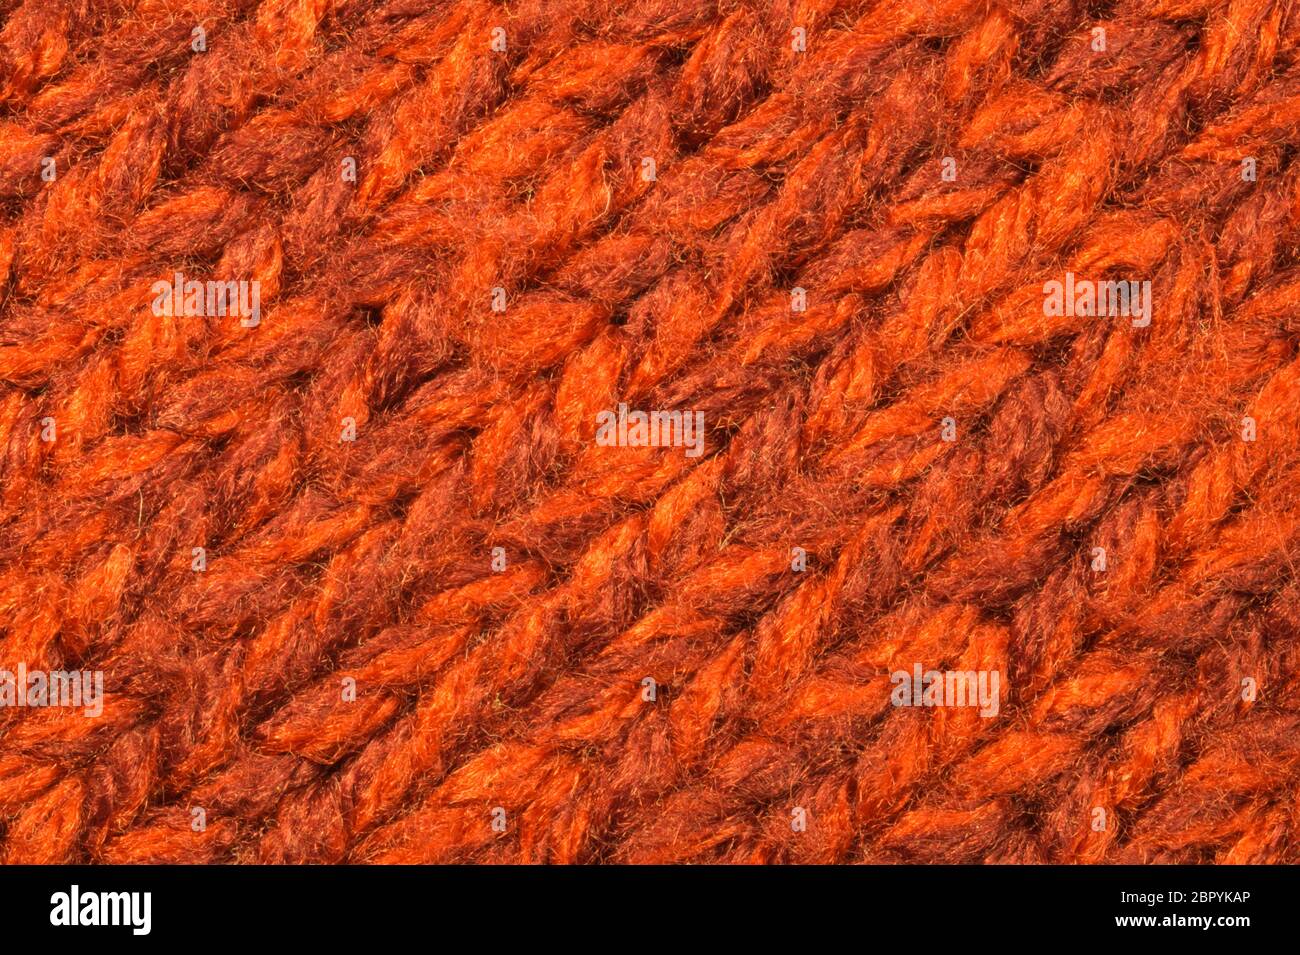 Merino wool colorful dyed textile long hanging strands Stock Photo